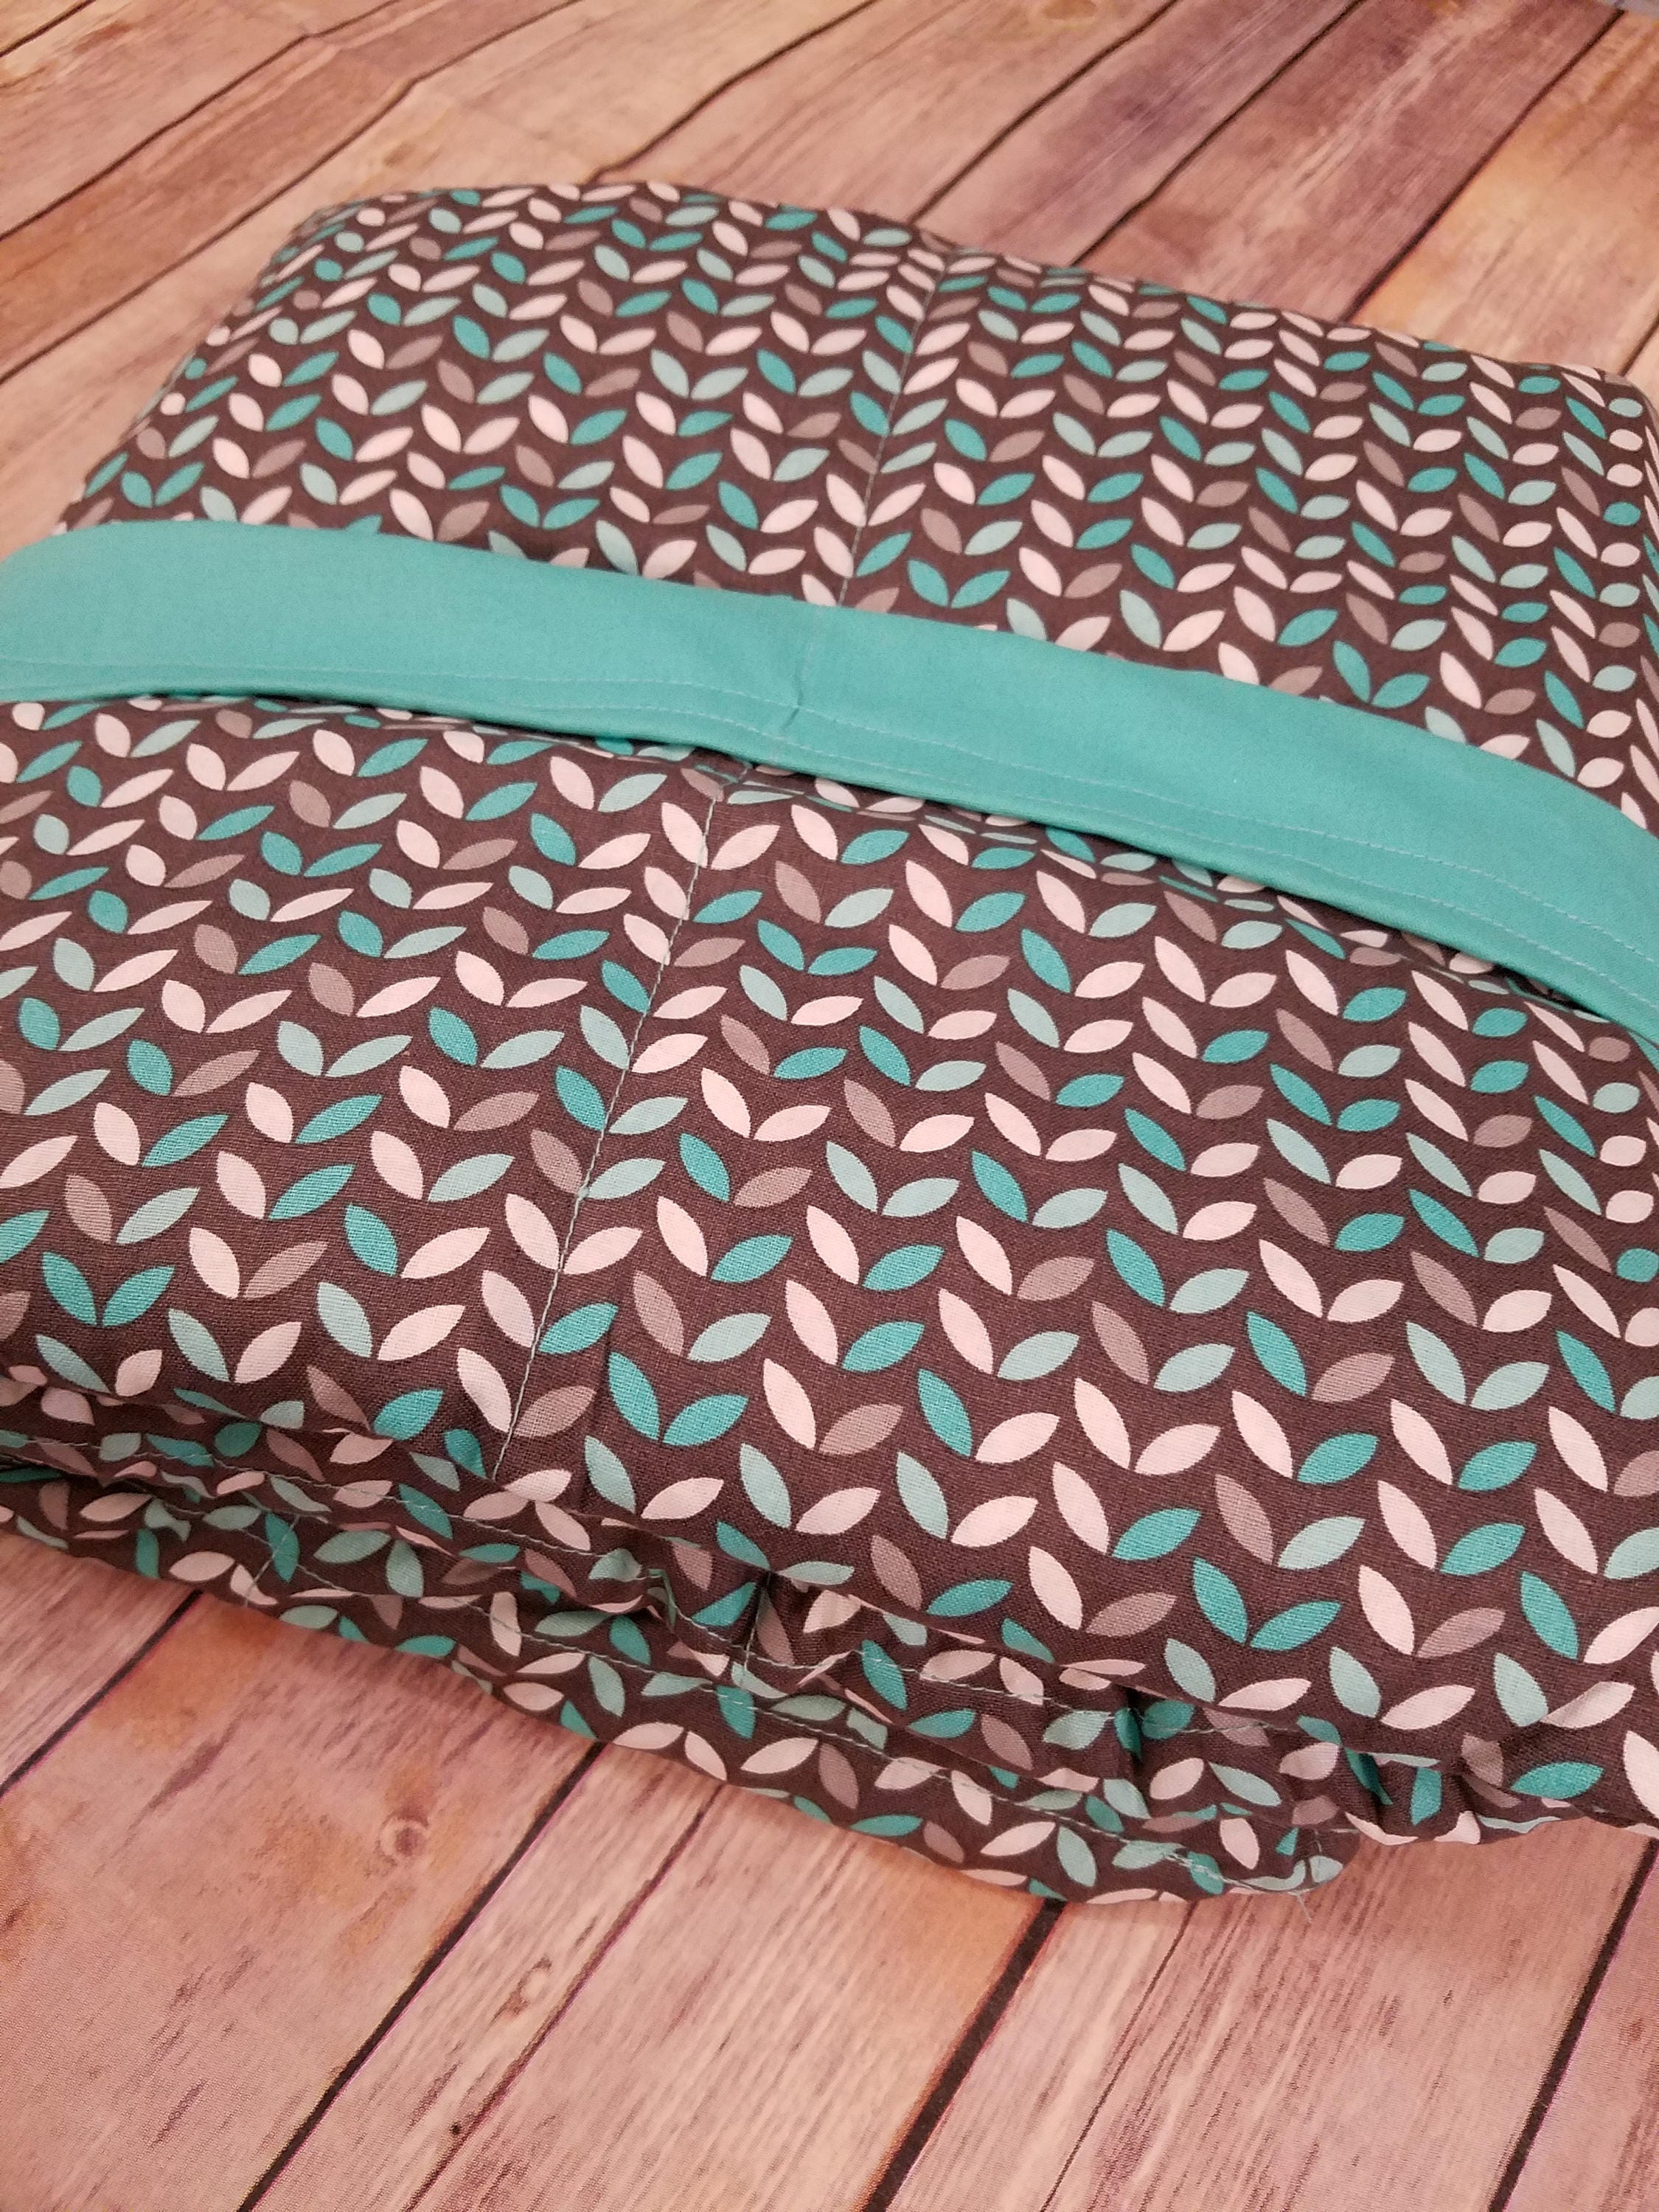 Weighted Blanket, 15 Pound, Mint Gray Leaves, Teal Back, 40x70, READY